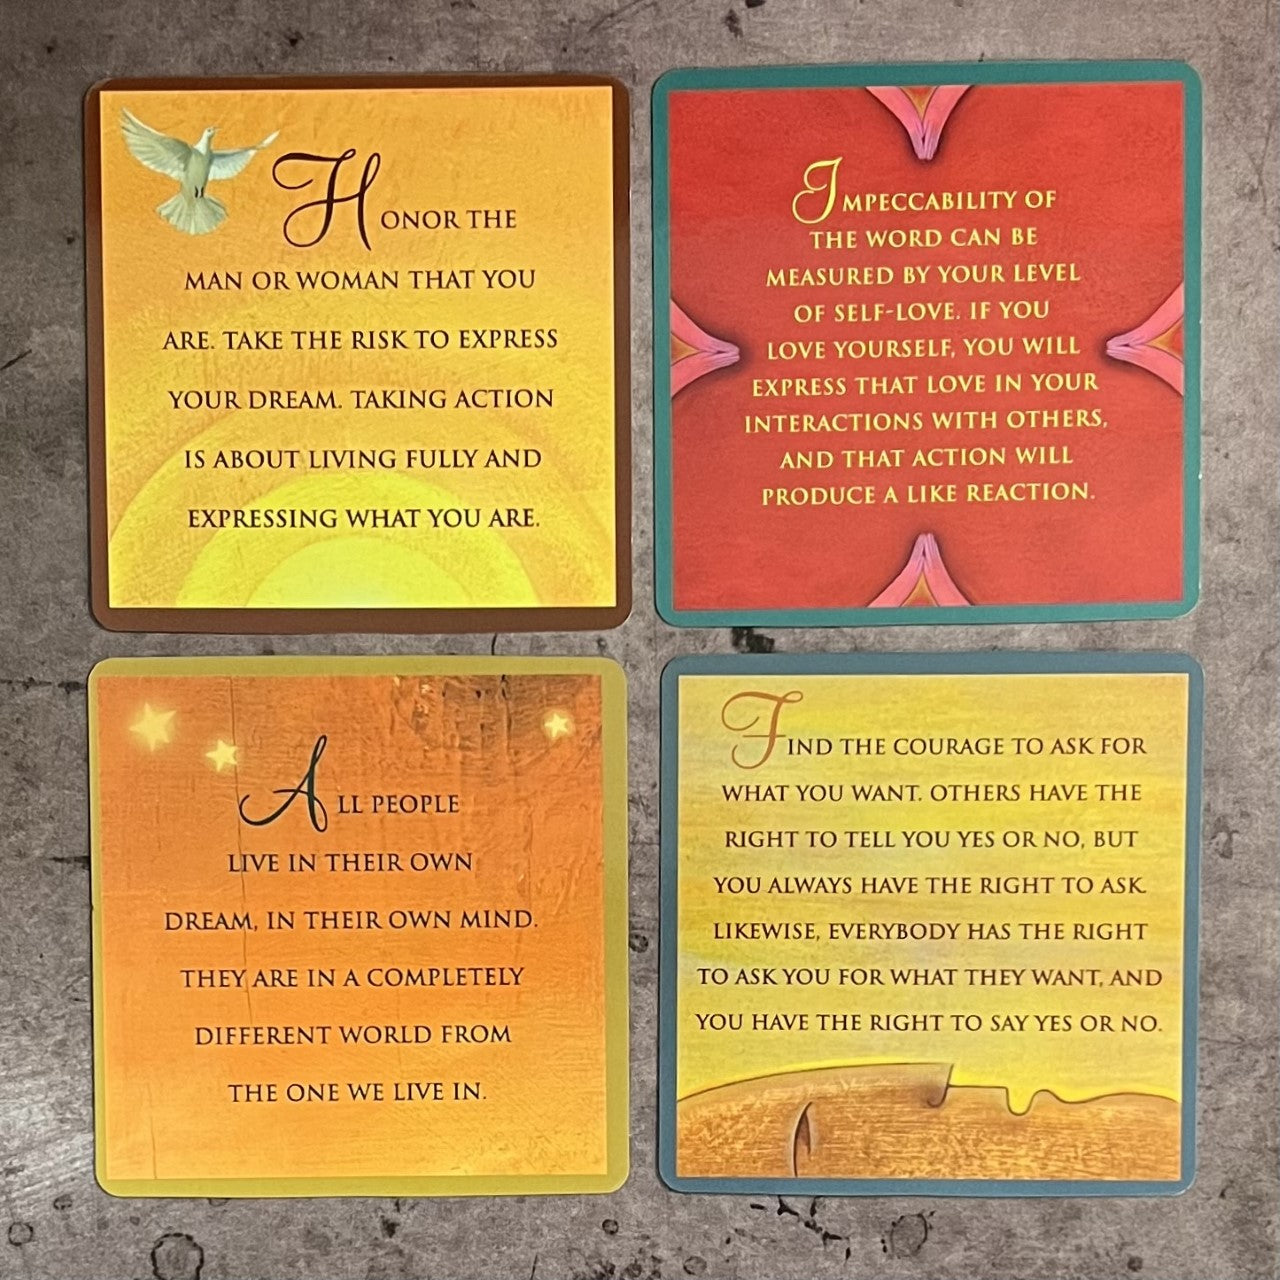 Four Agreements Cards by don Miguel Ruiz